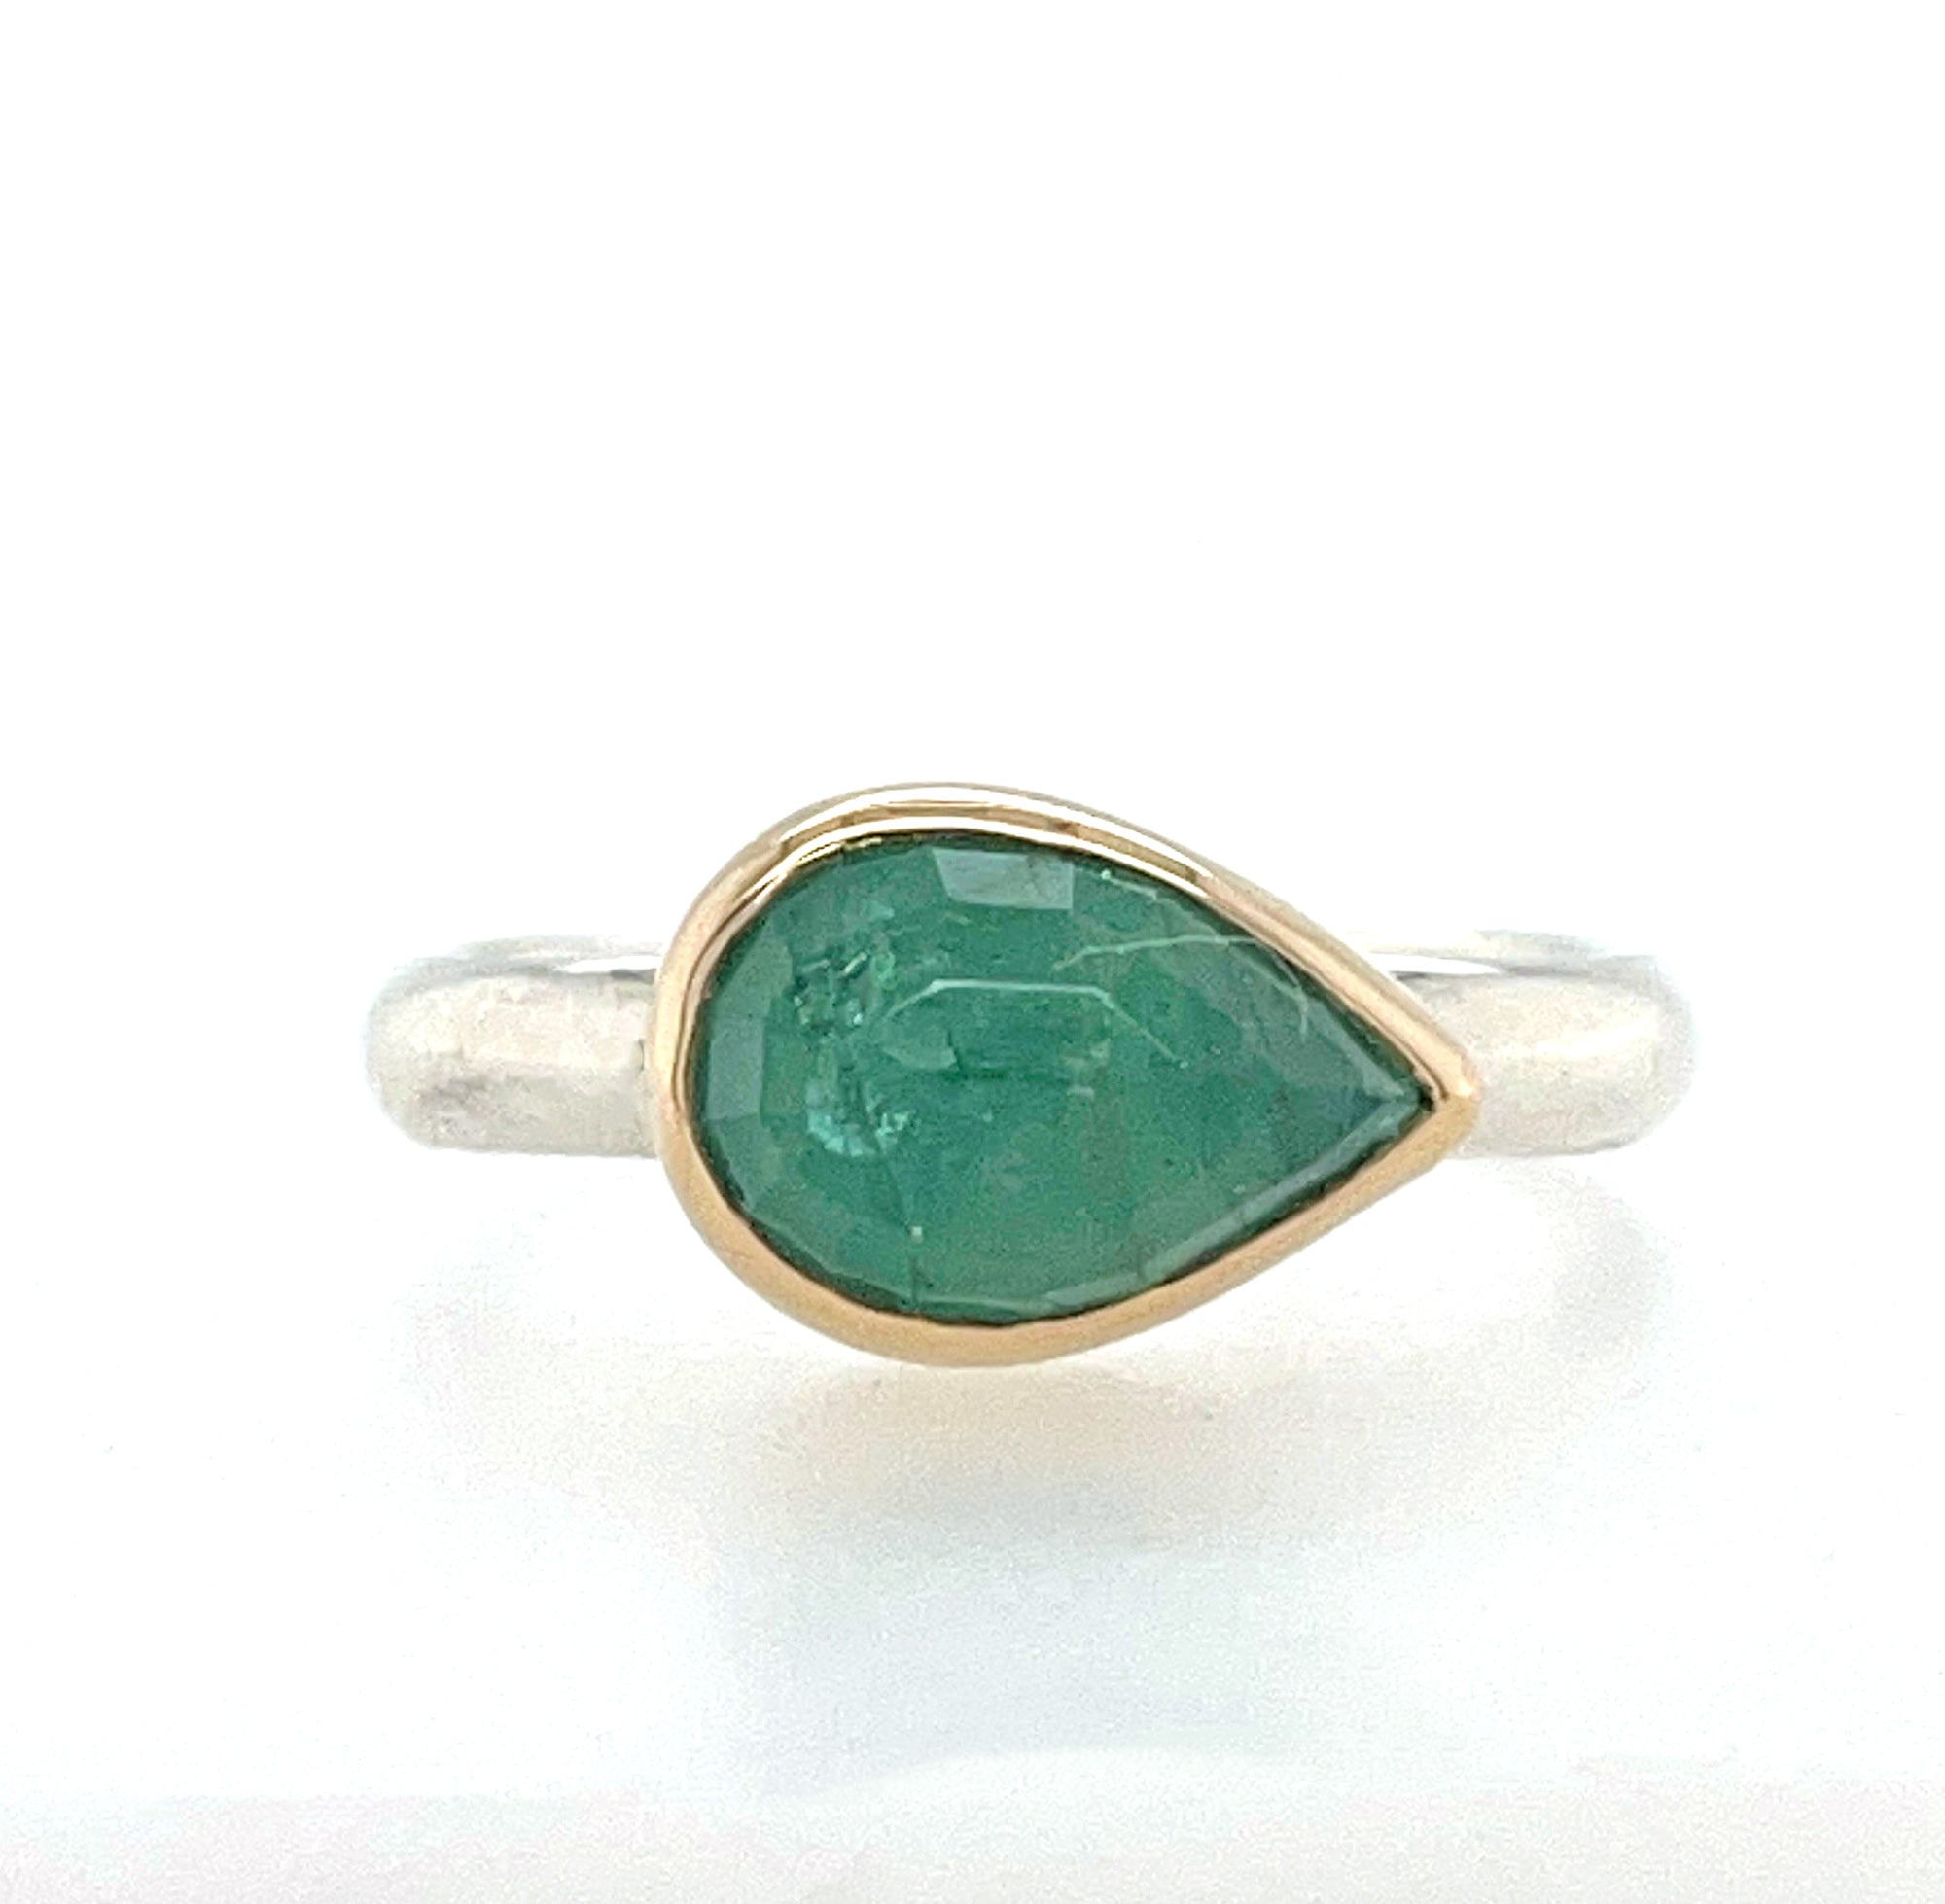 Natural Rose Cut Emerald Ring in 14k Gold and Sterling Silver, Pear Shaped Emerald Ring, Minimalist Ring, Stacking Ring, May Birthstone